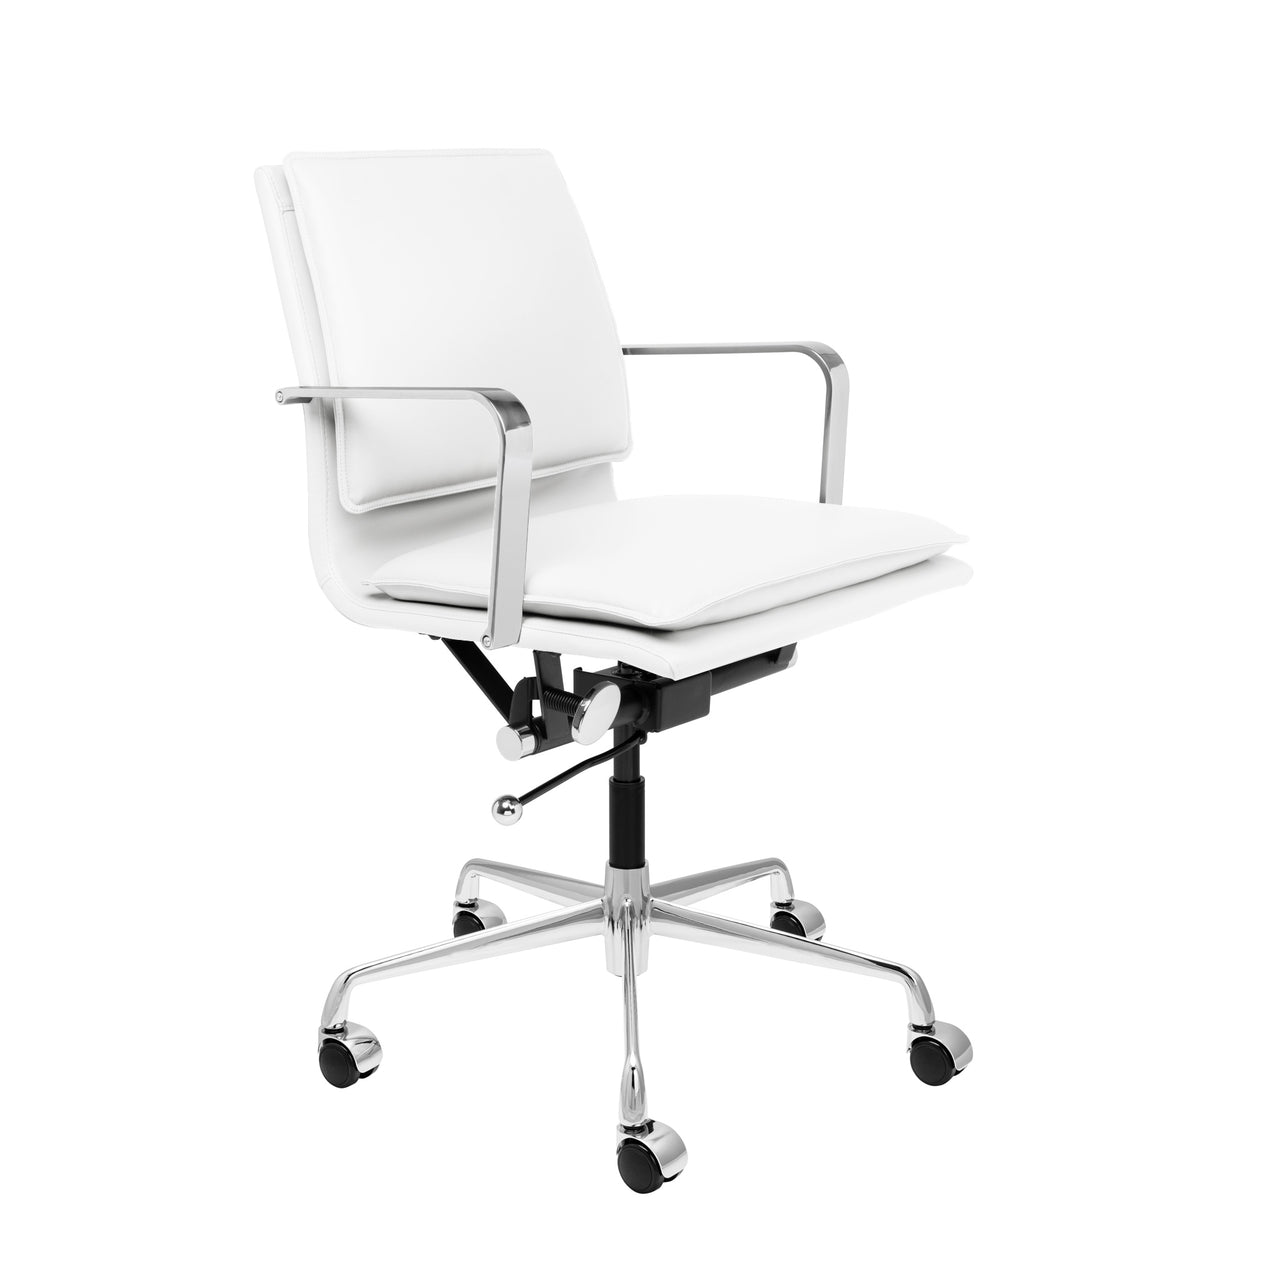 Lexi Soft Pad Office Chair (White)